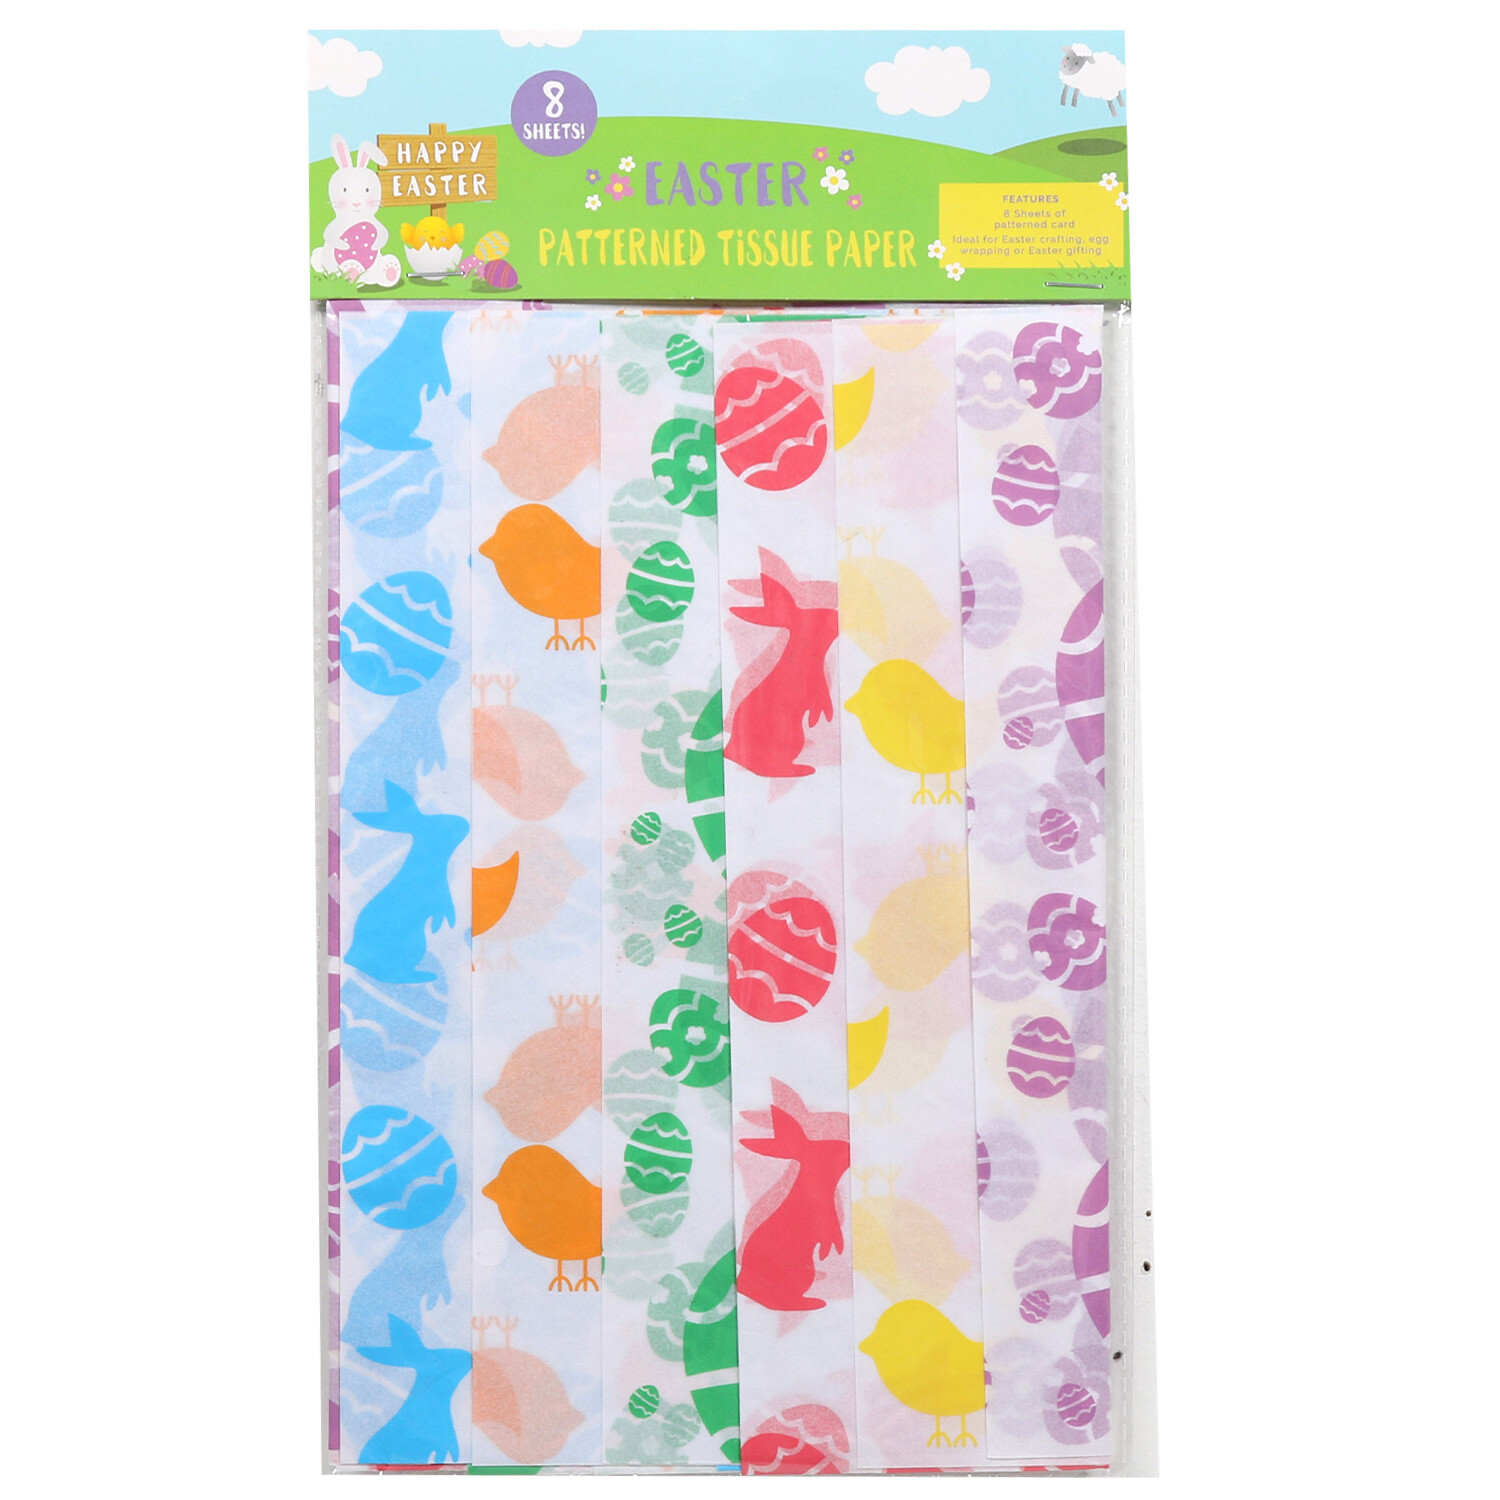 Single Easter Patterned Tissue Paper 8 Pack in Assorted styles Image 1